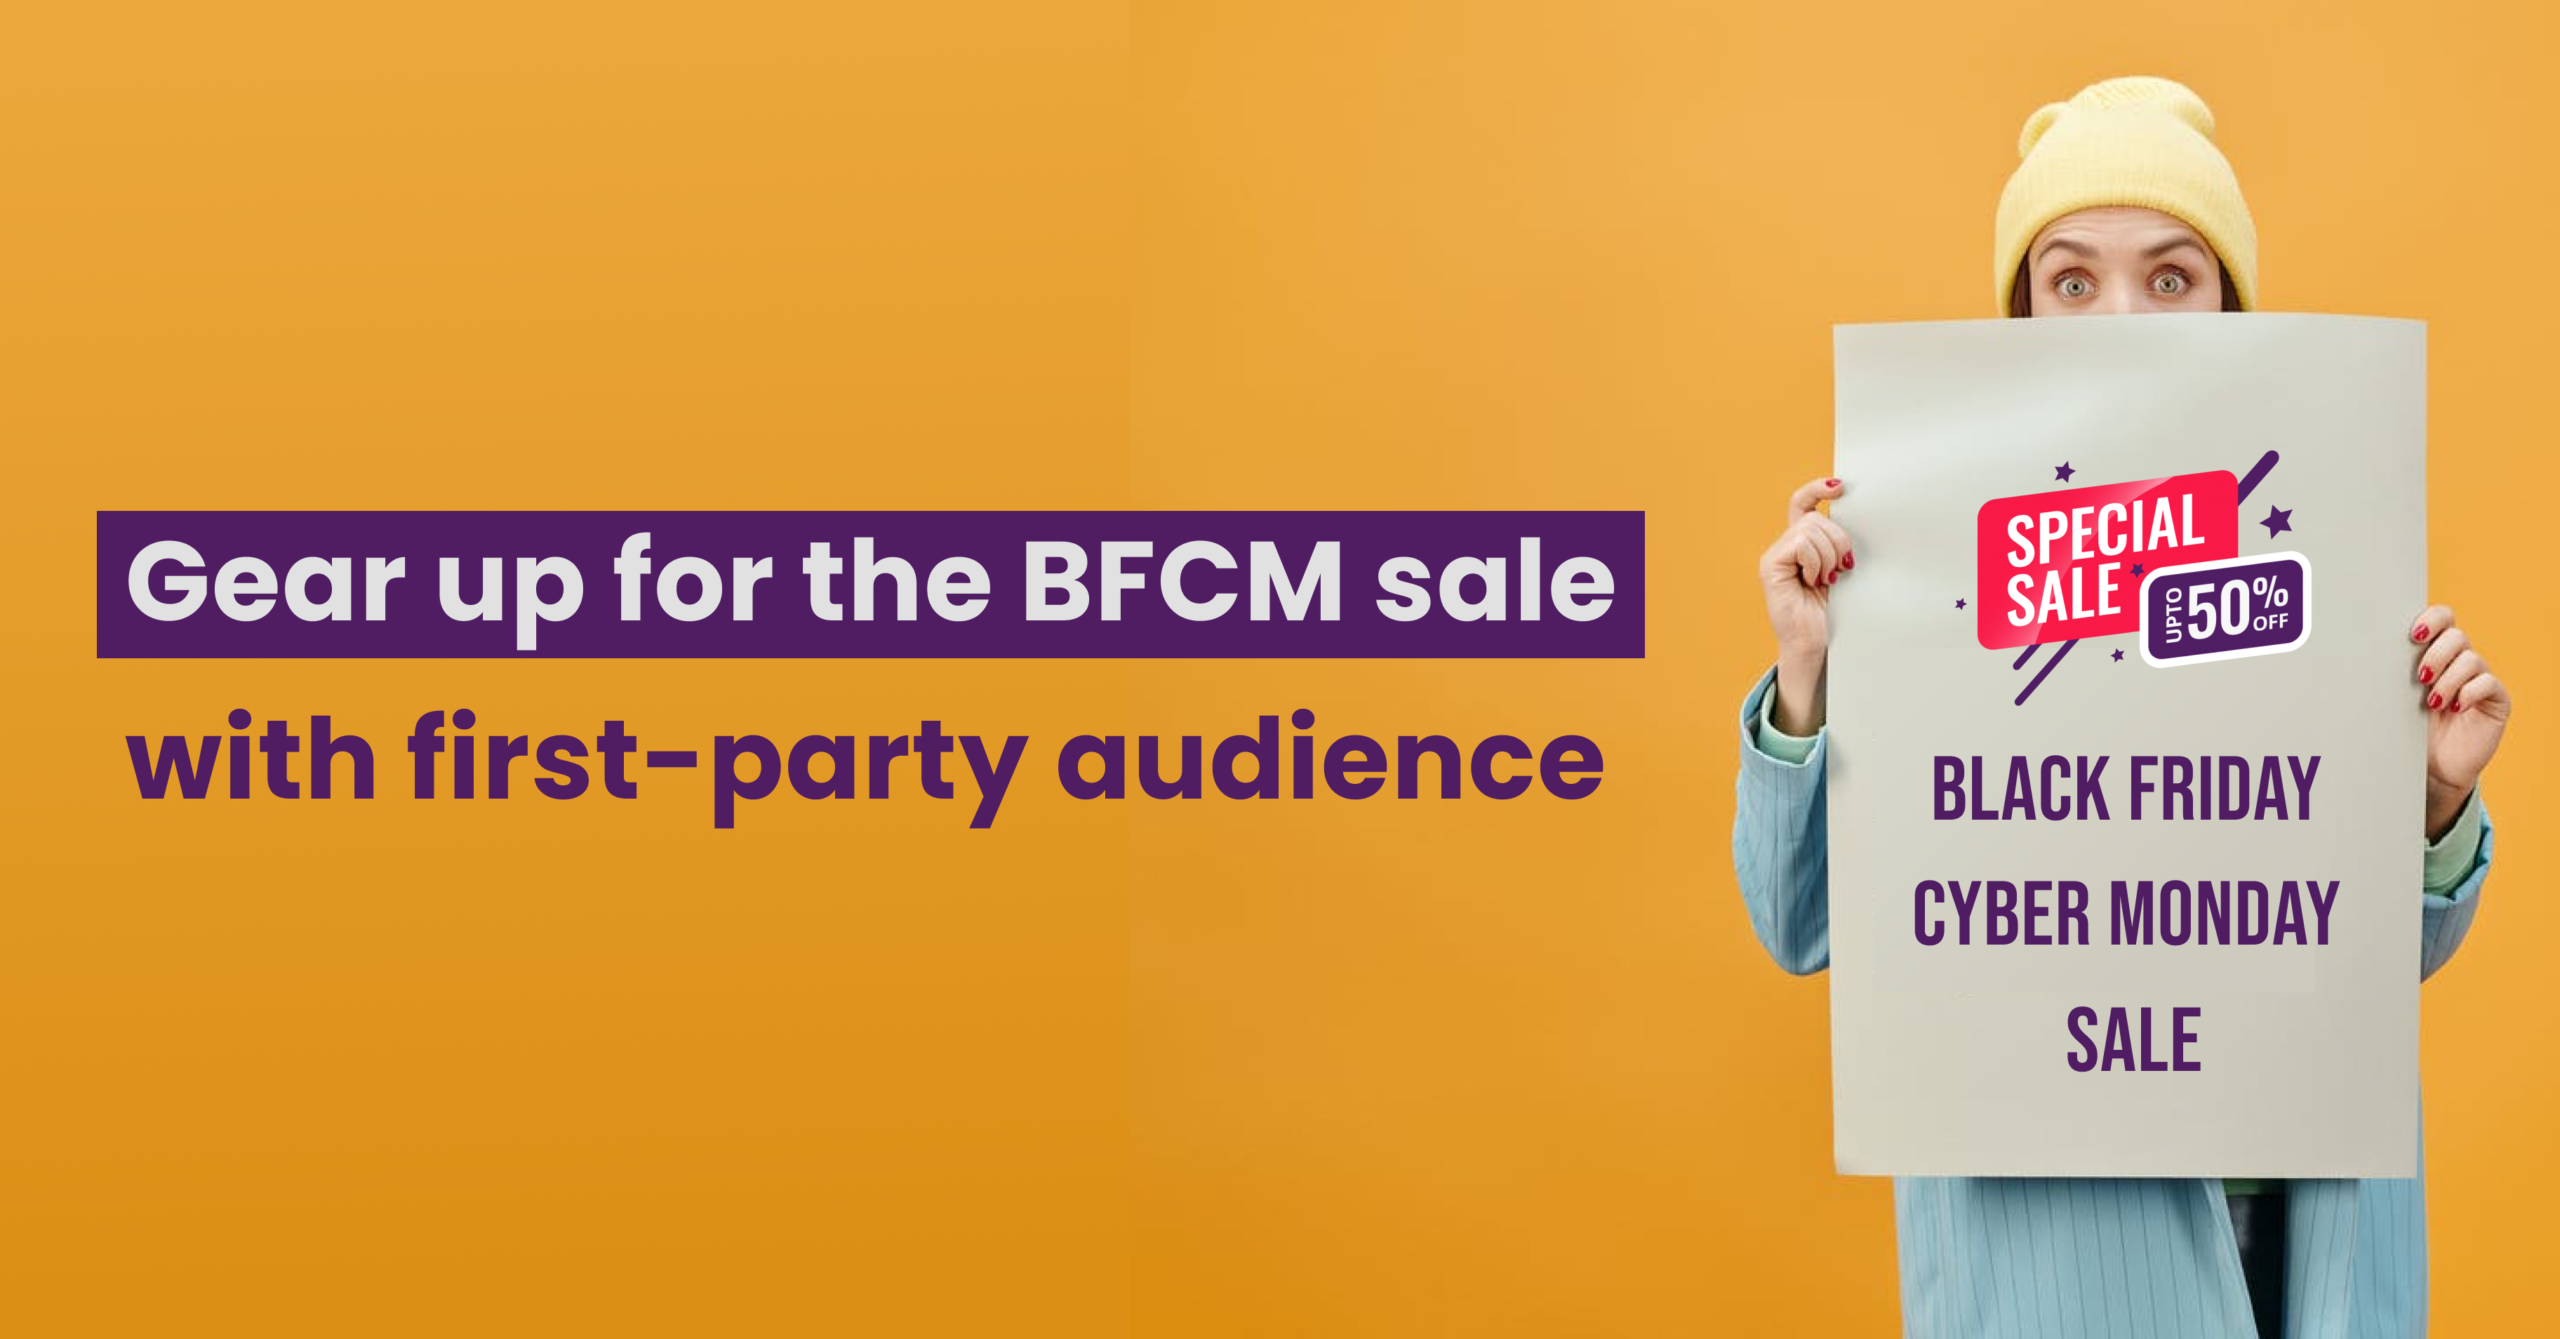 Gear up for the BFCM sale with first-party audience